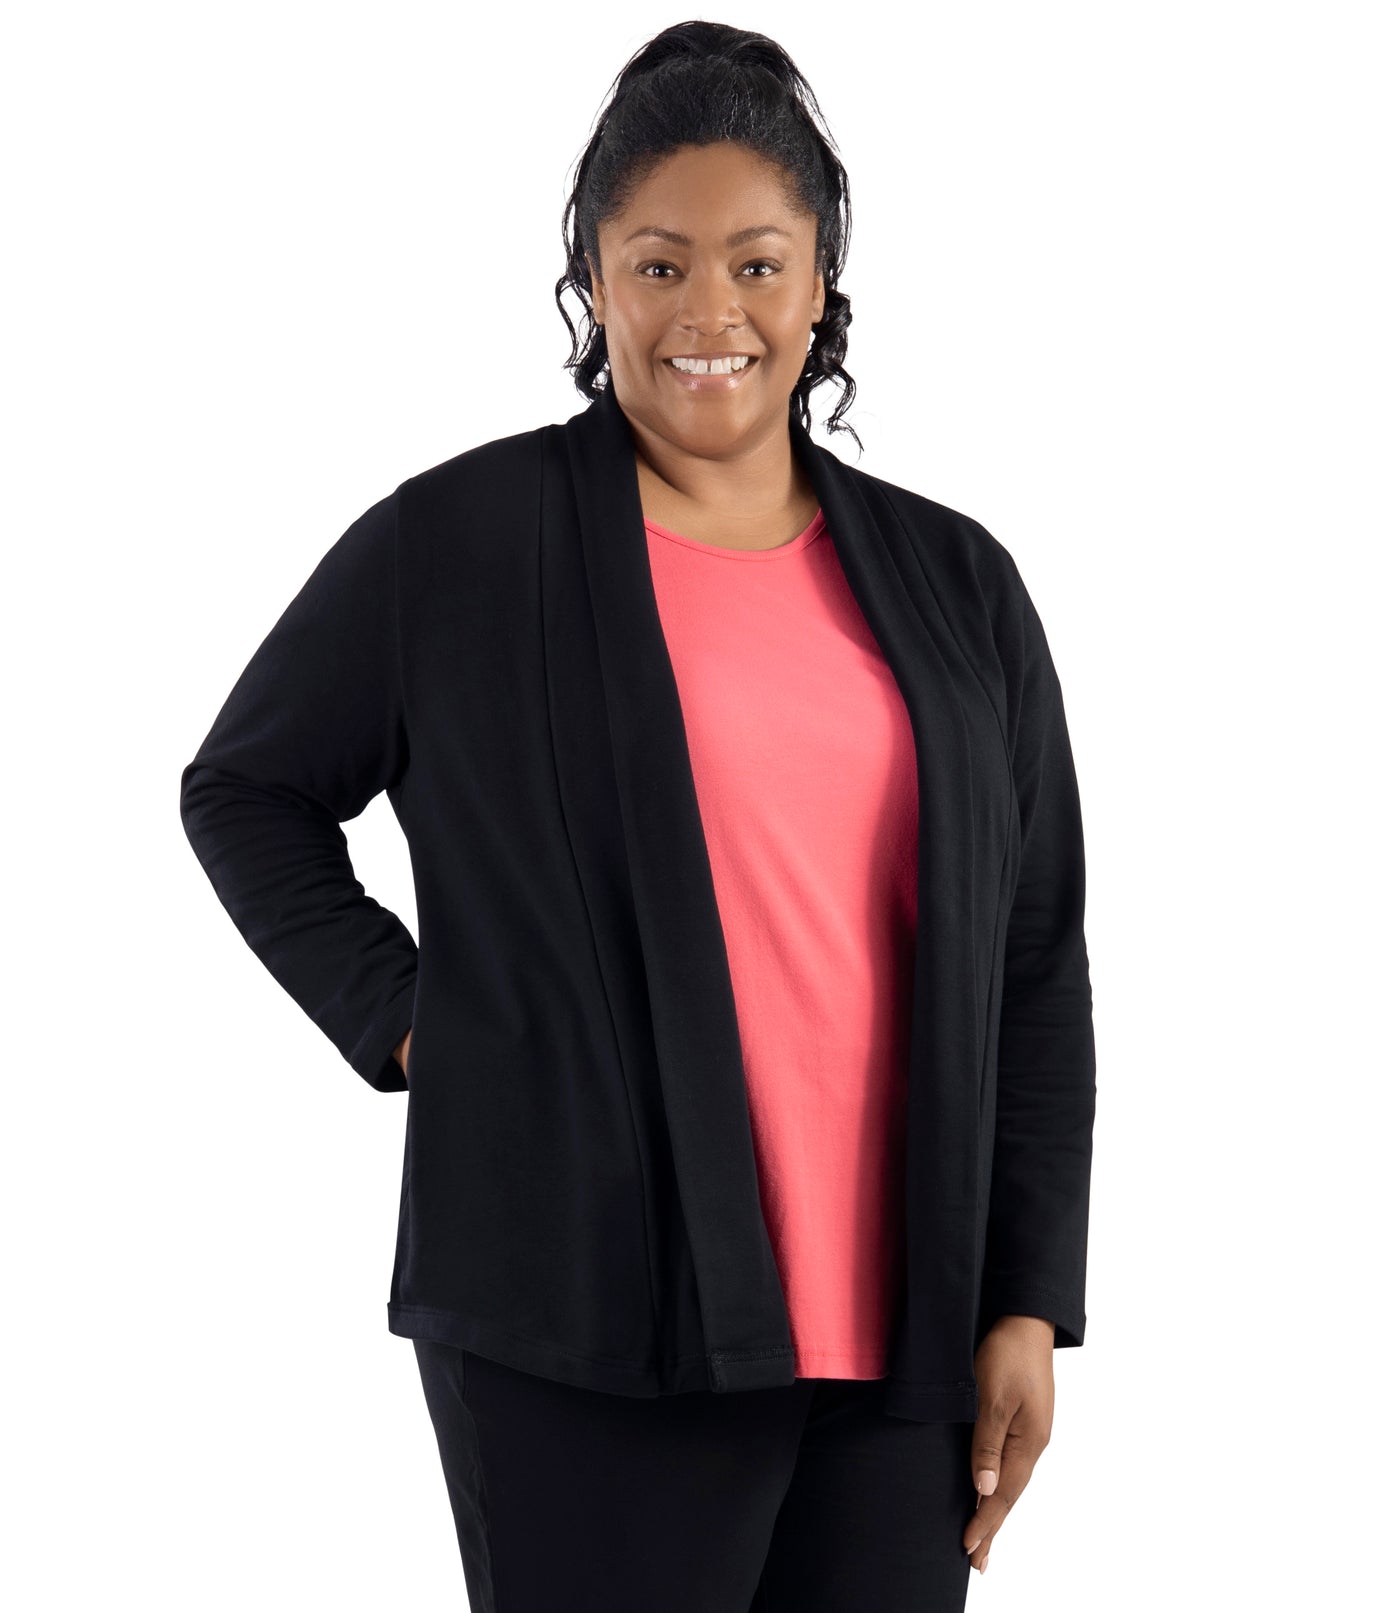 Plus-size model, facing forward, wearing JunoActive's Mavie Cotton Wrap Jacket in color black. Her right hand is in her pocket of jacket and left hand hanging by her side.